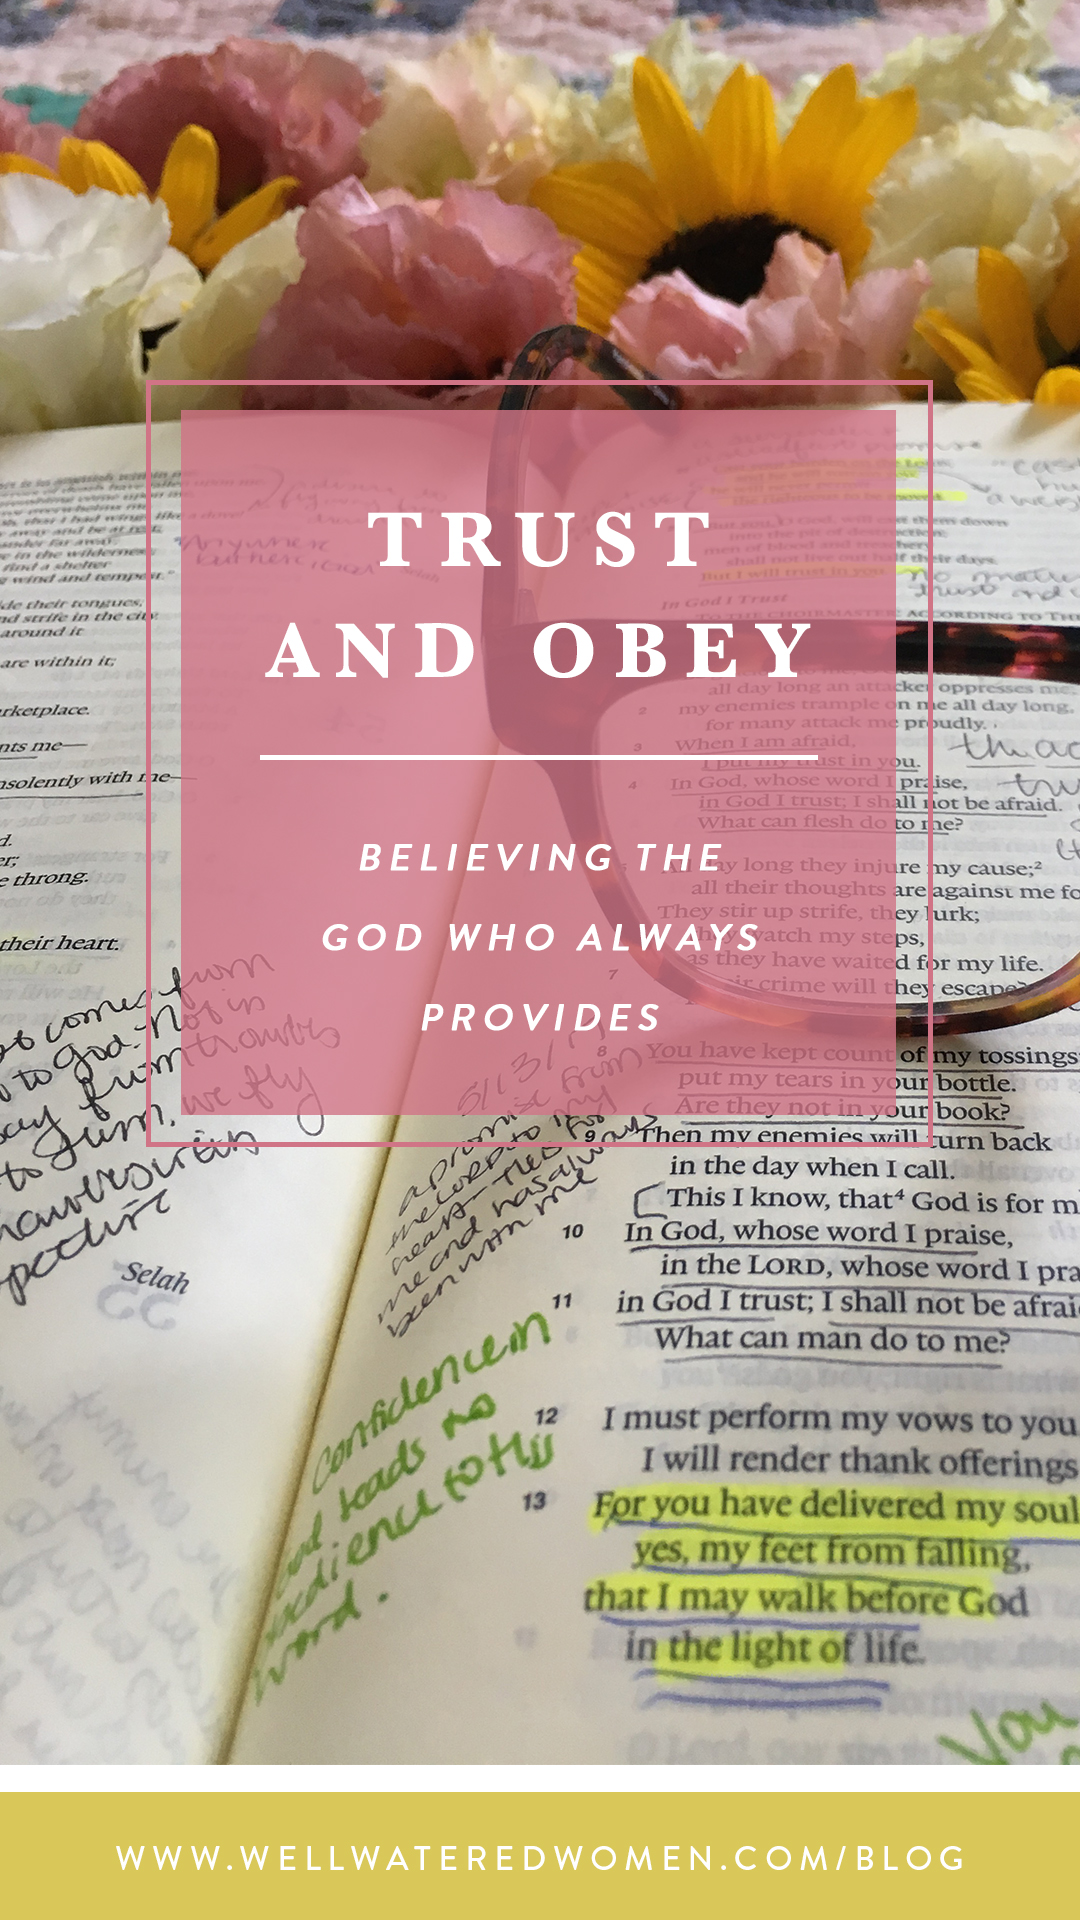 Trust and Obey: Believing in the God who ALWAYS provides - Well-Watered Women Blog